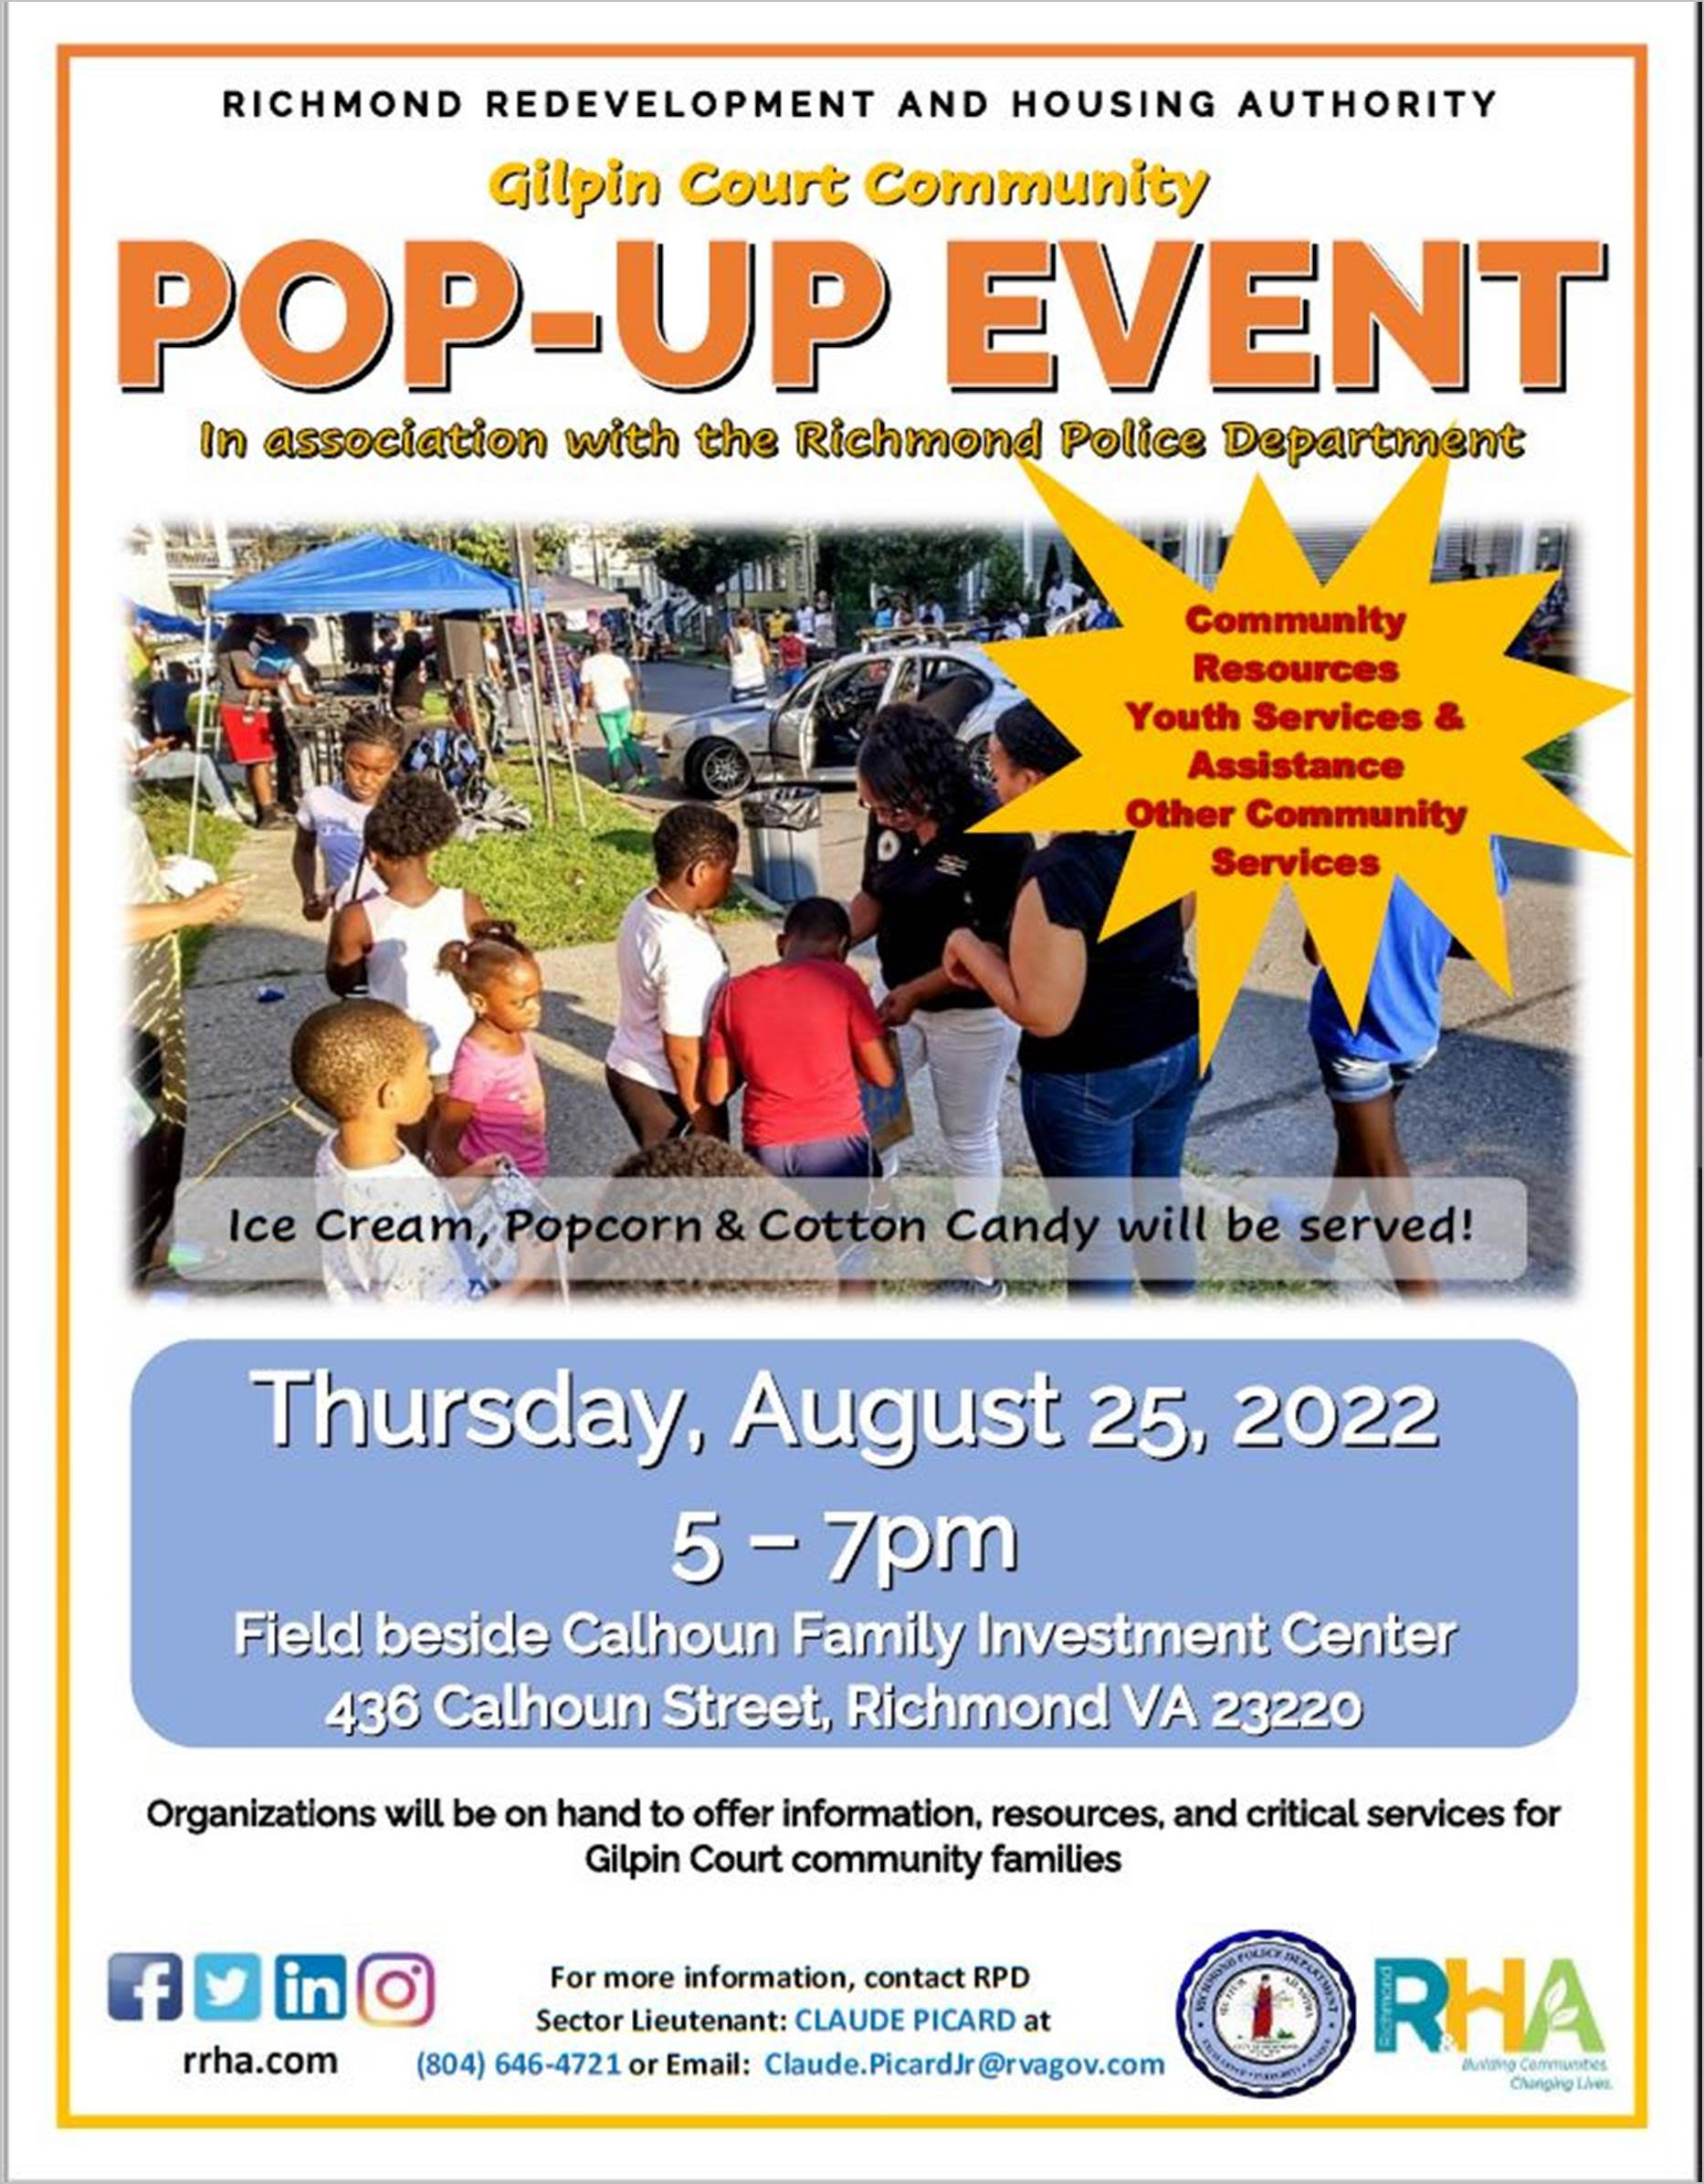 Gilpin Court Community Pop-up Event on August 25, 2022